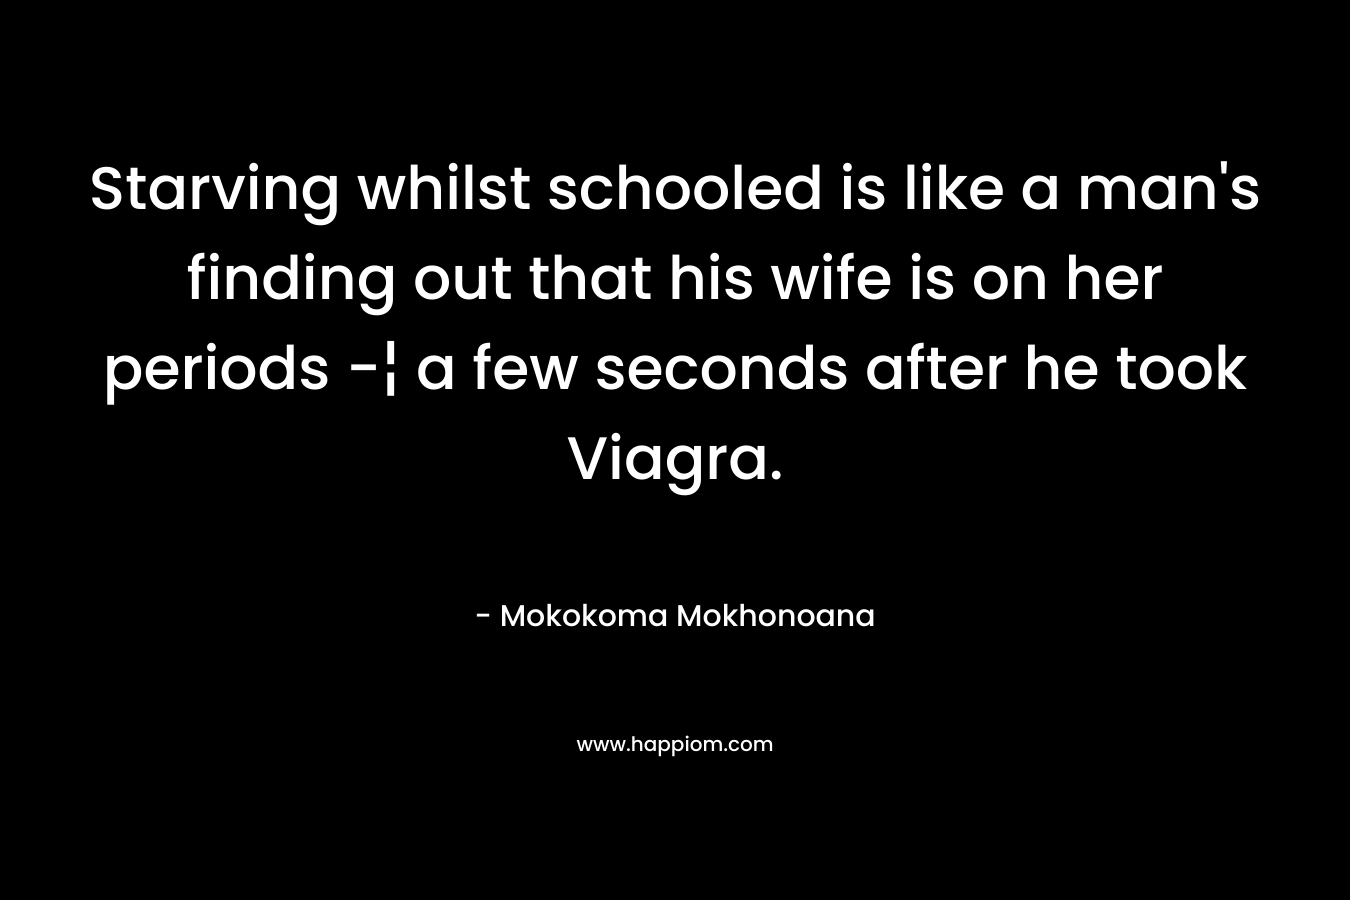 Starving whilst schooled is like a man's finding out that his wife is on her periods -¦ a few seconds after he took Viagra.